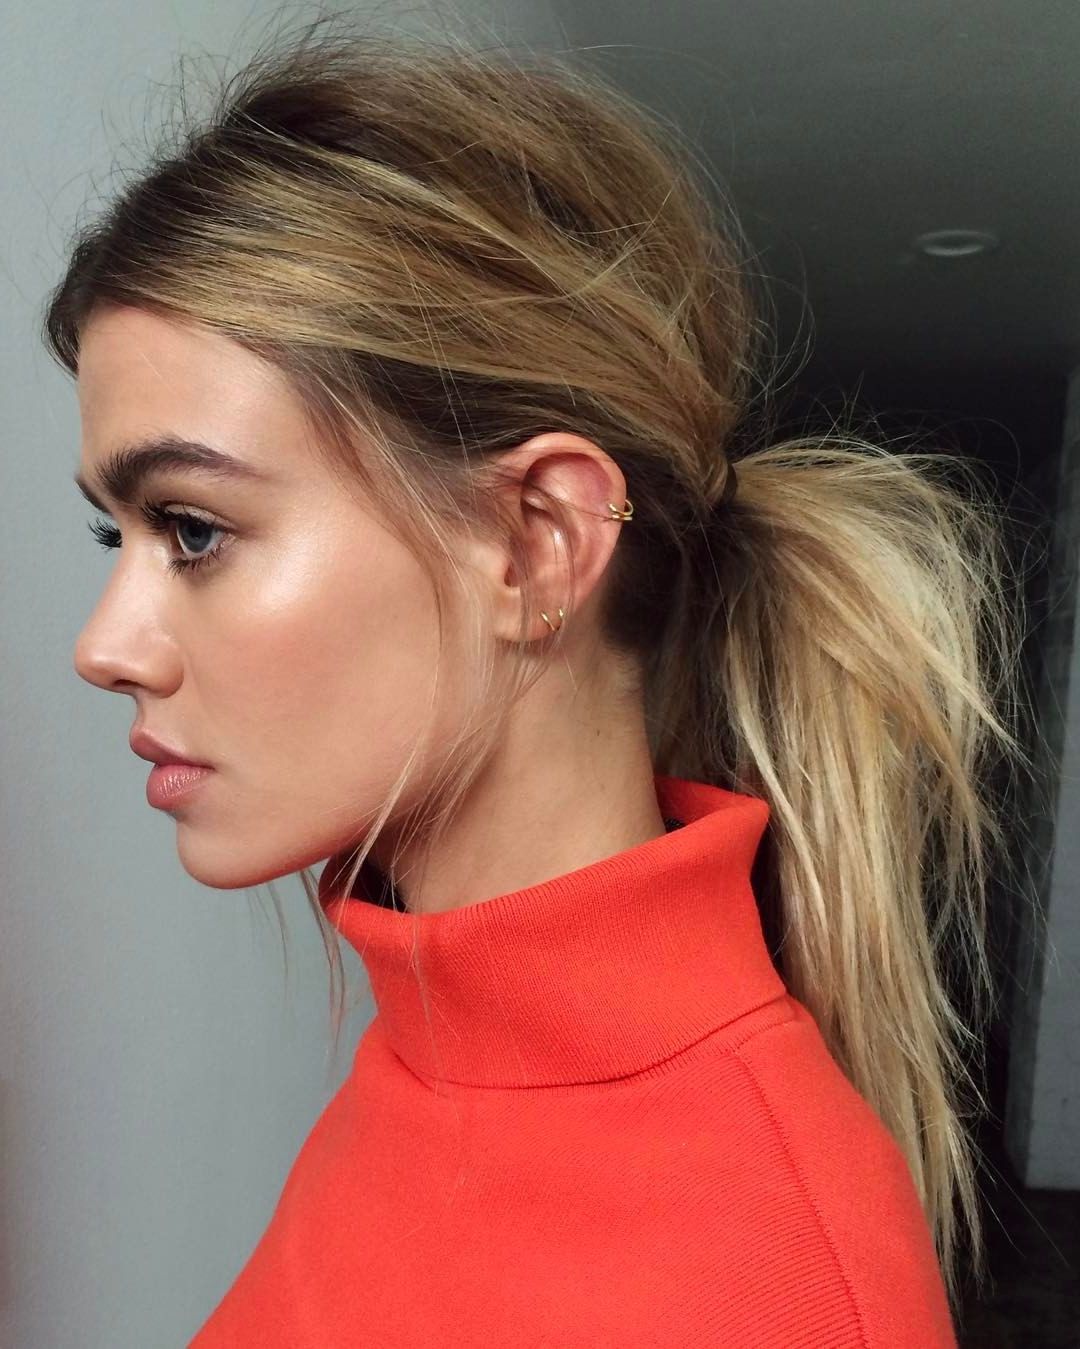 Ponytail Hairstyles Pertaining To 2019 Messy Voluminous Ponytail Hairstyles With Textured Bangs (View 11 of 20)